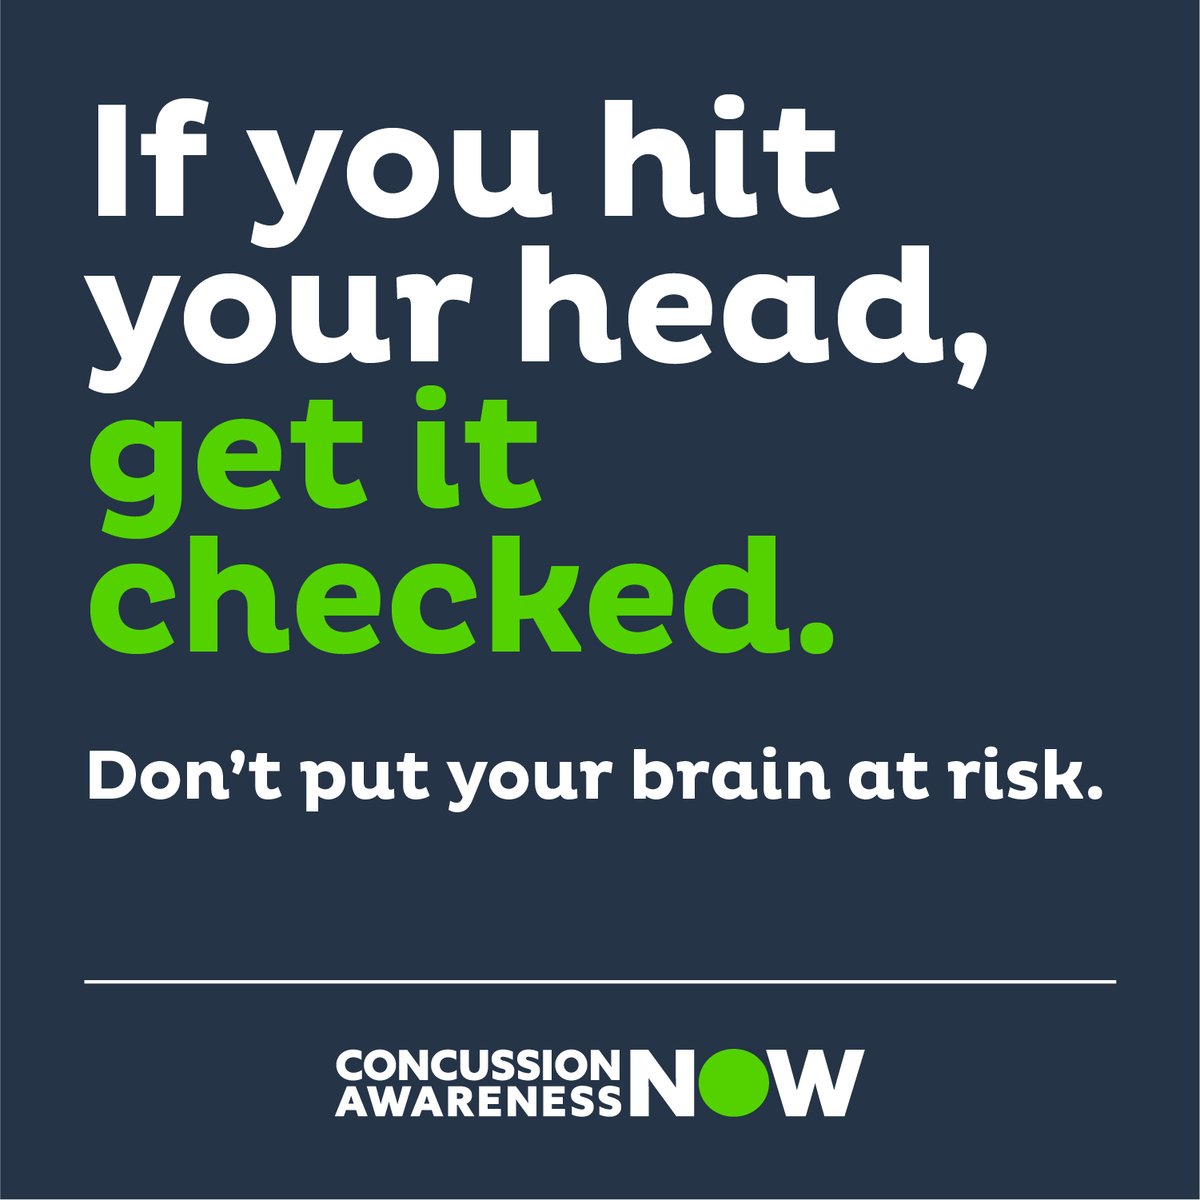 Millions of people sustain concussions each year, and most of them never even know it. Join our partners at Concussion Awareness Now for a Champions Rally Webinar, and see how we’re taking on this invisible injury. abbo.tt/3TD7lYr